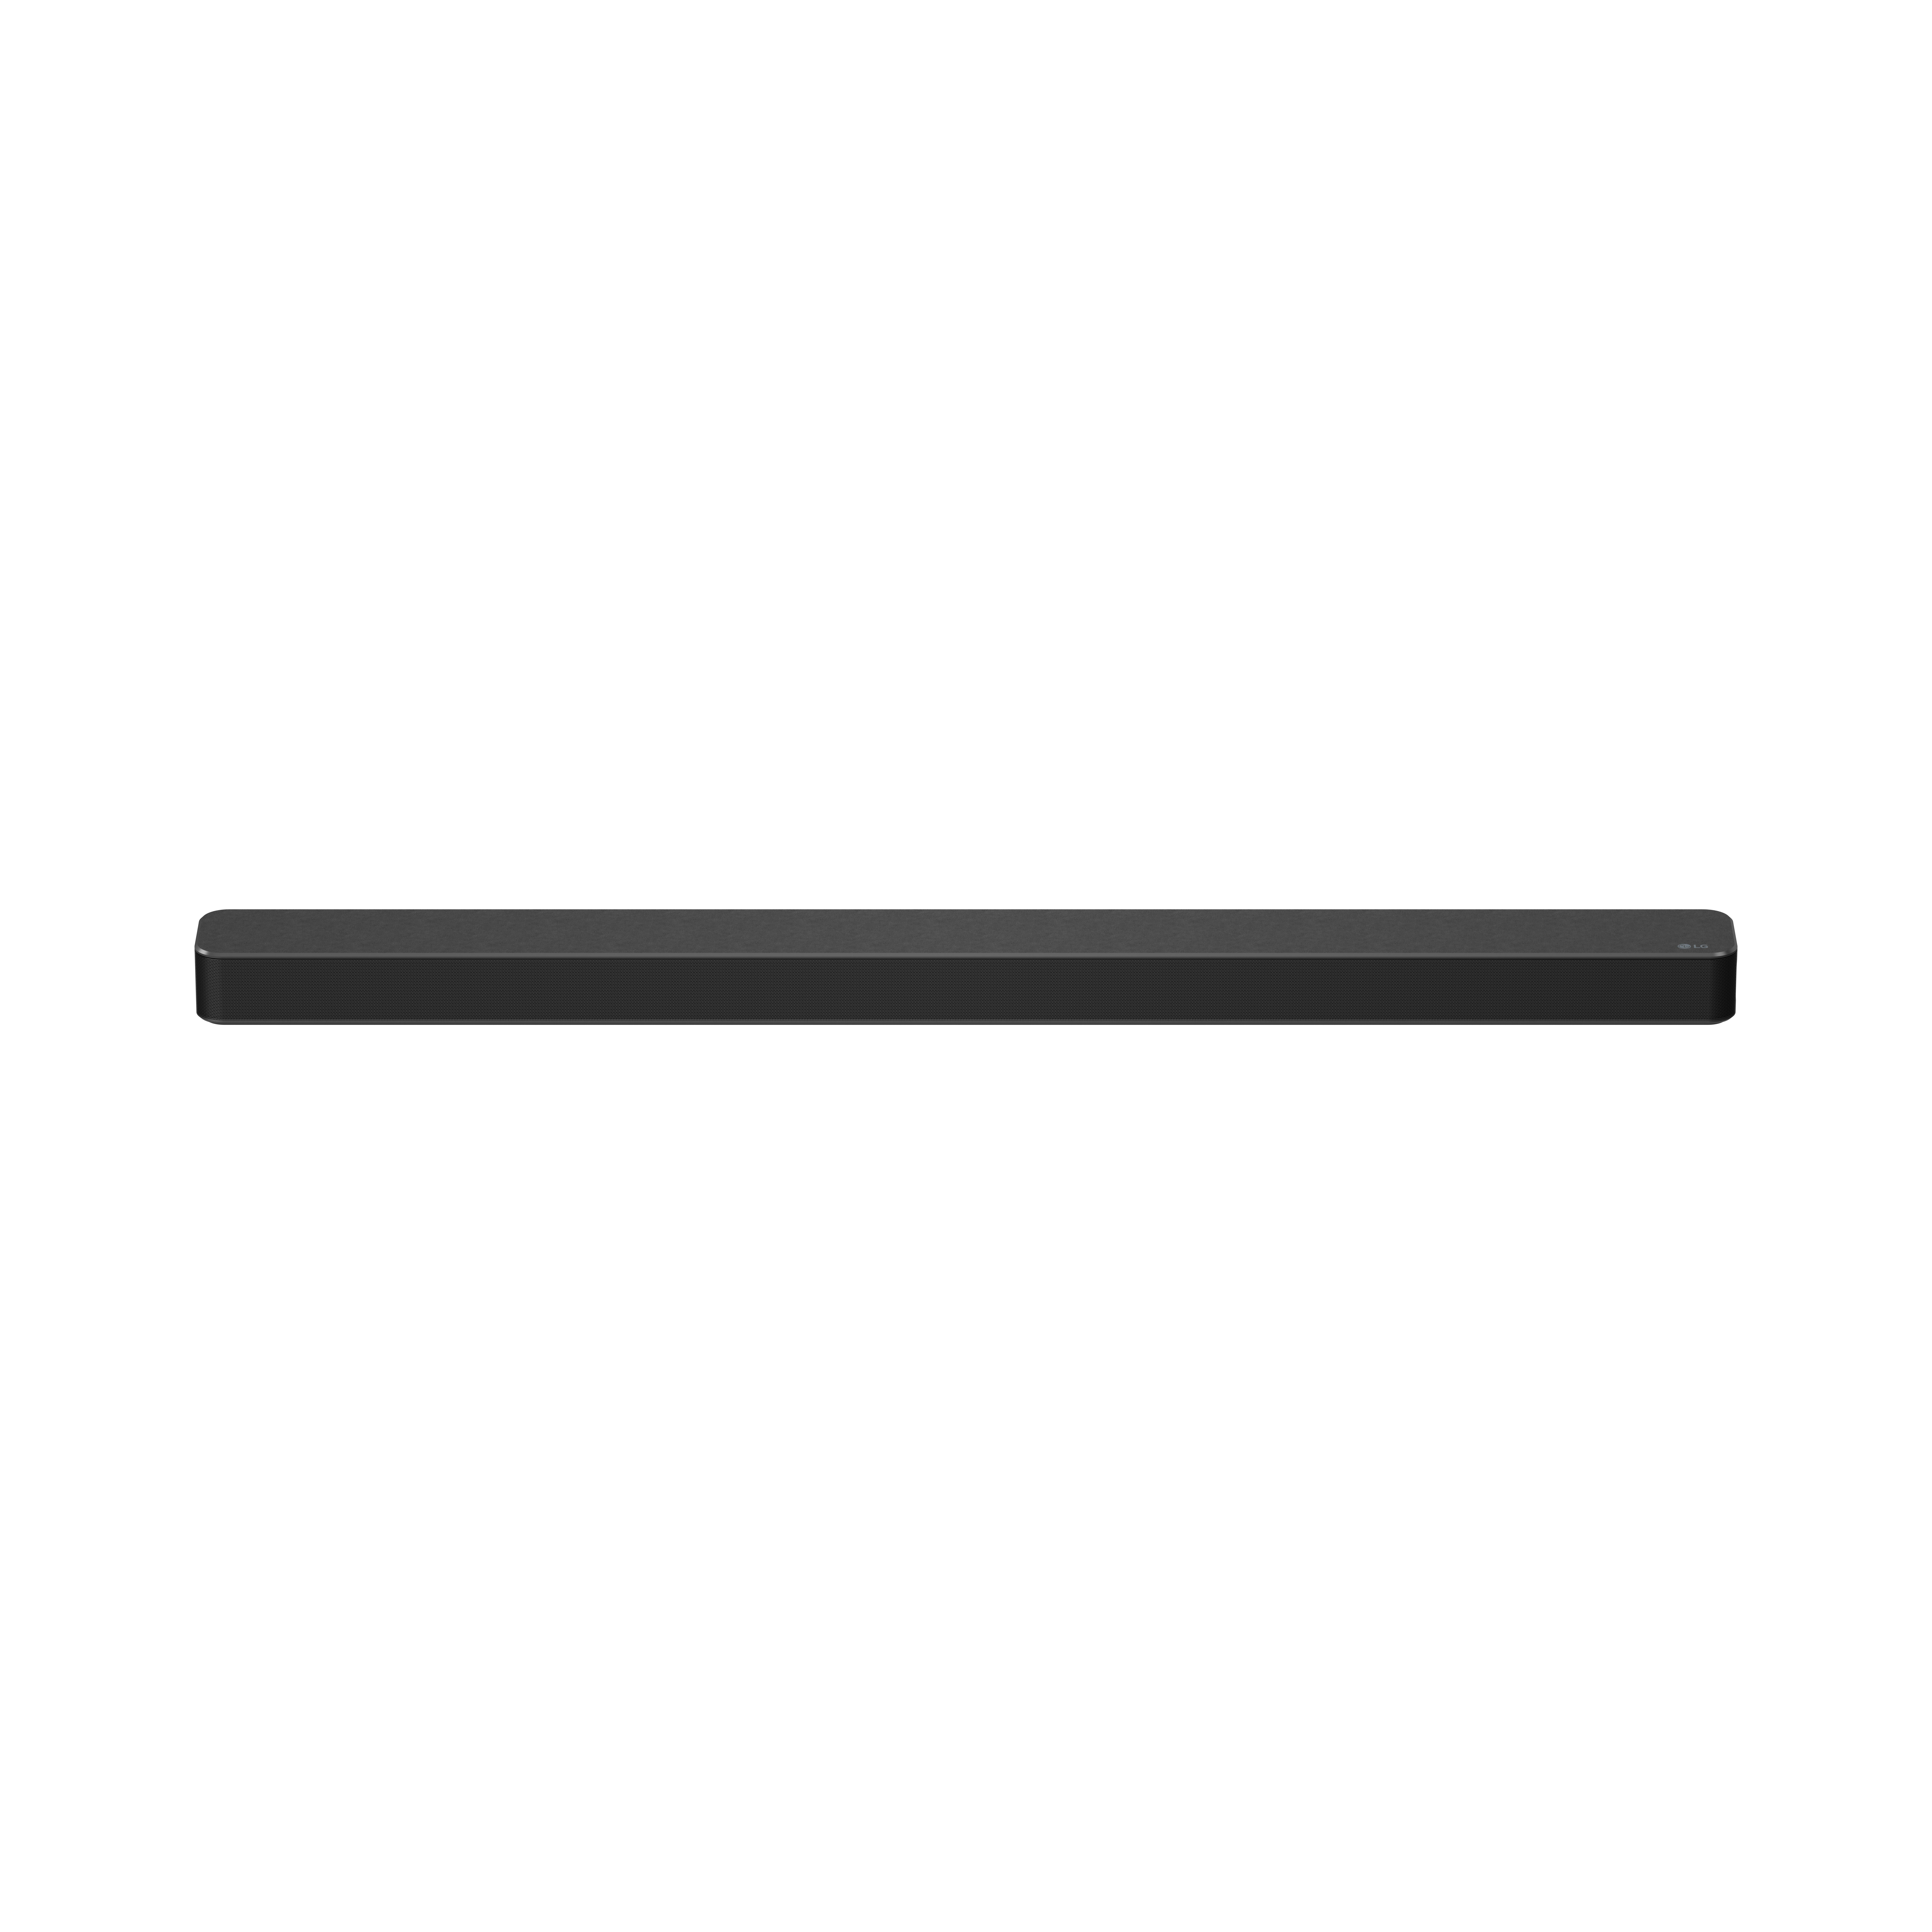 LG 3.1.2 Channel High Res Audio Soundbar with Dolby Atmos® and Goolge Assitant Built-In - SN8YG - image 2 of 17